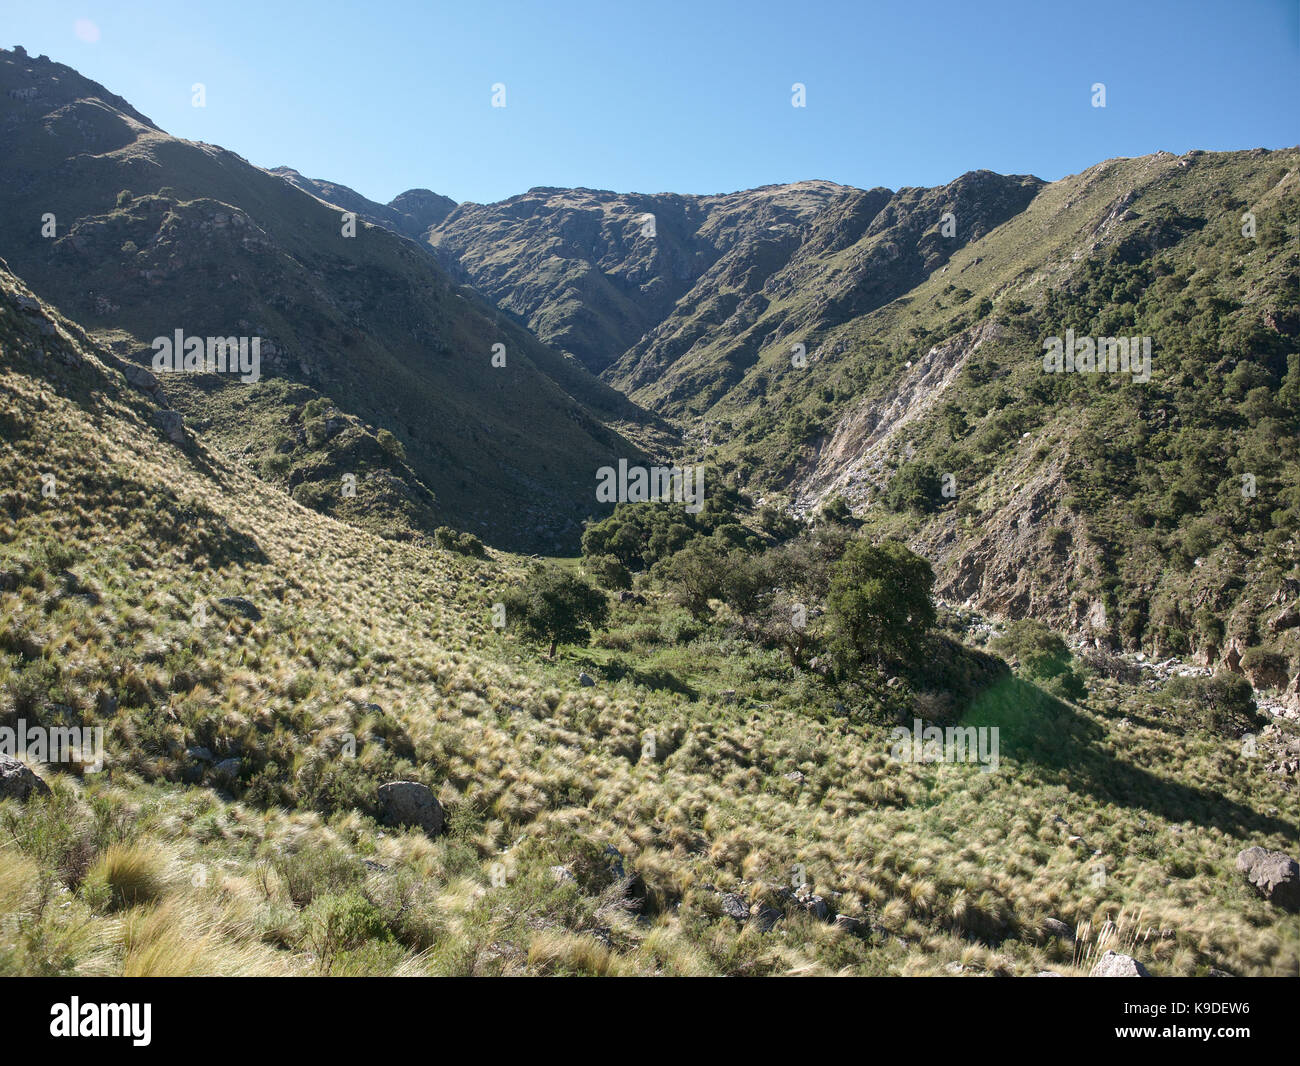 Villa de Merlo, San Luis, Argentina - 2017: The Pasos Malos creek and mountains, located at the town limits. Stock Photo